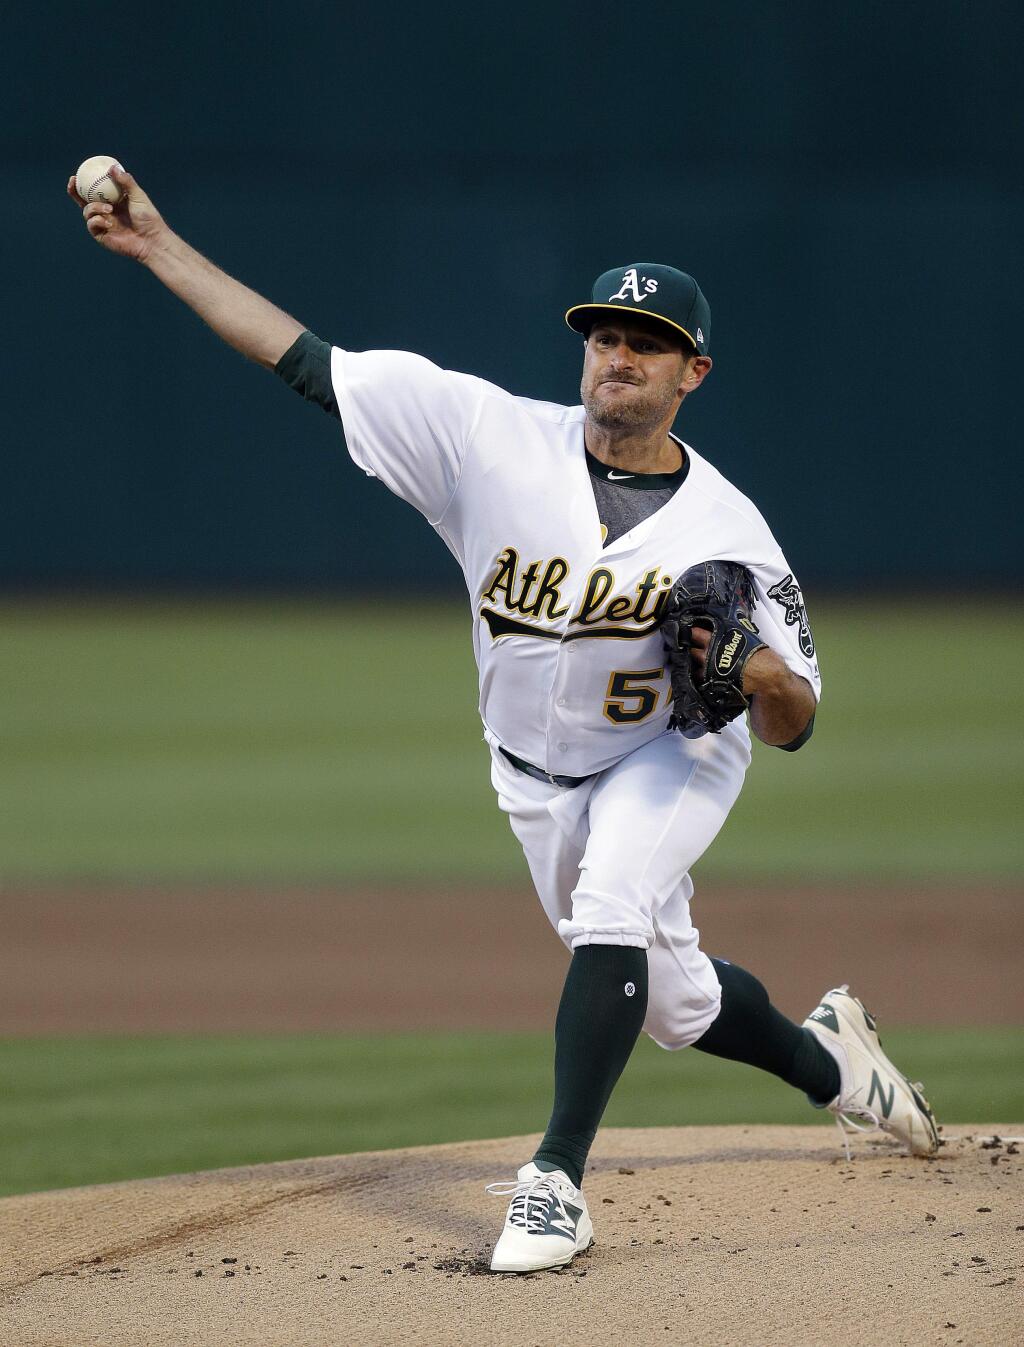 Oakland Athletics pitcher Chris Smith works against the Tampa Bay Rays during the first inning of a baseball game Tuesday, July 18, 2017, in Oakland, Calif. (AP Photo/Ben Margot)